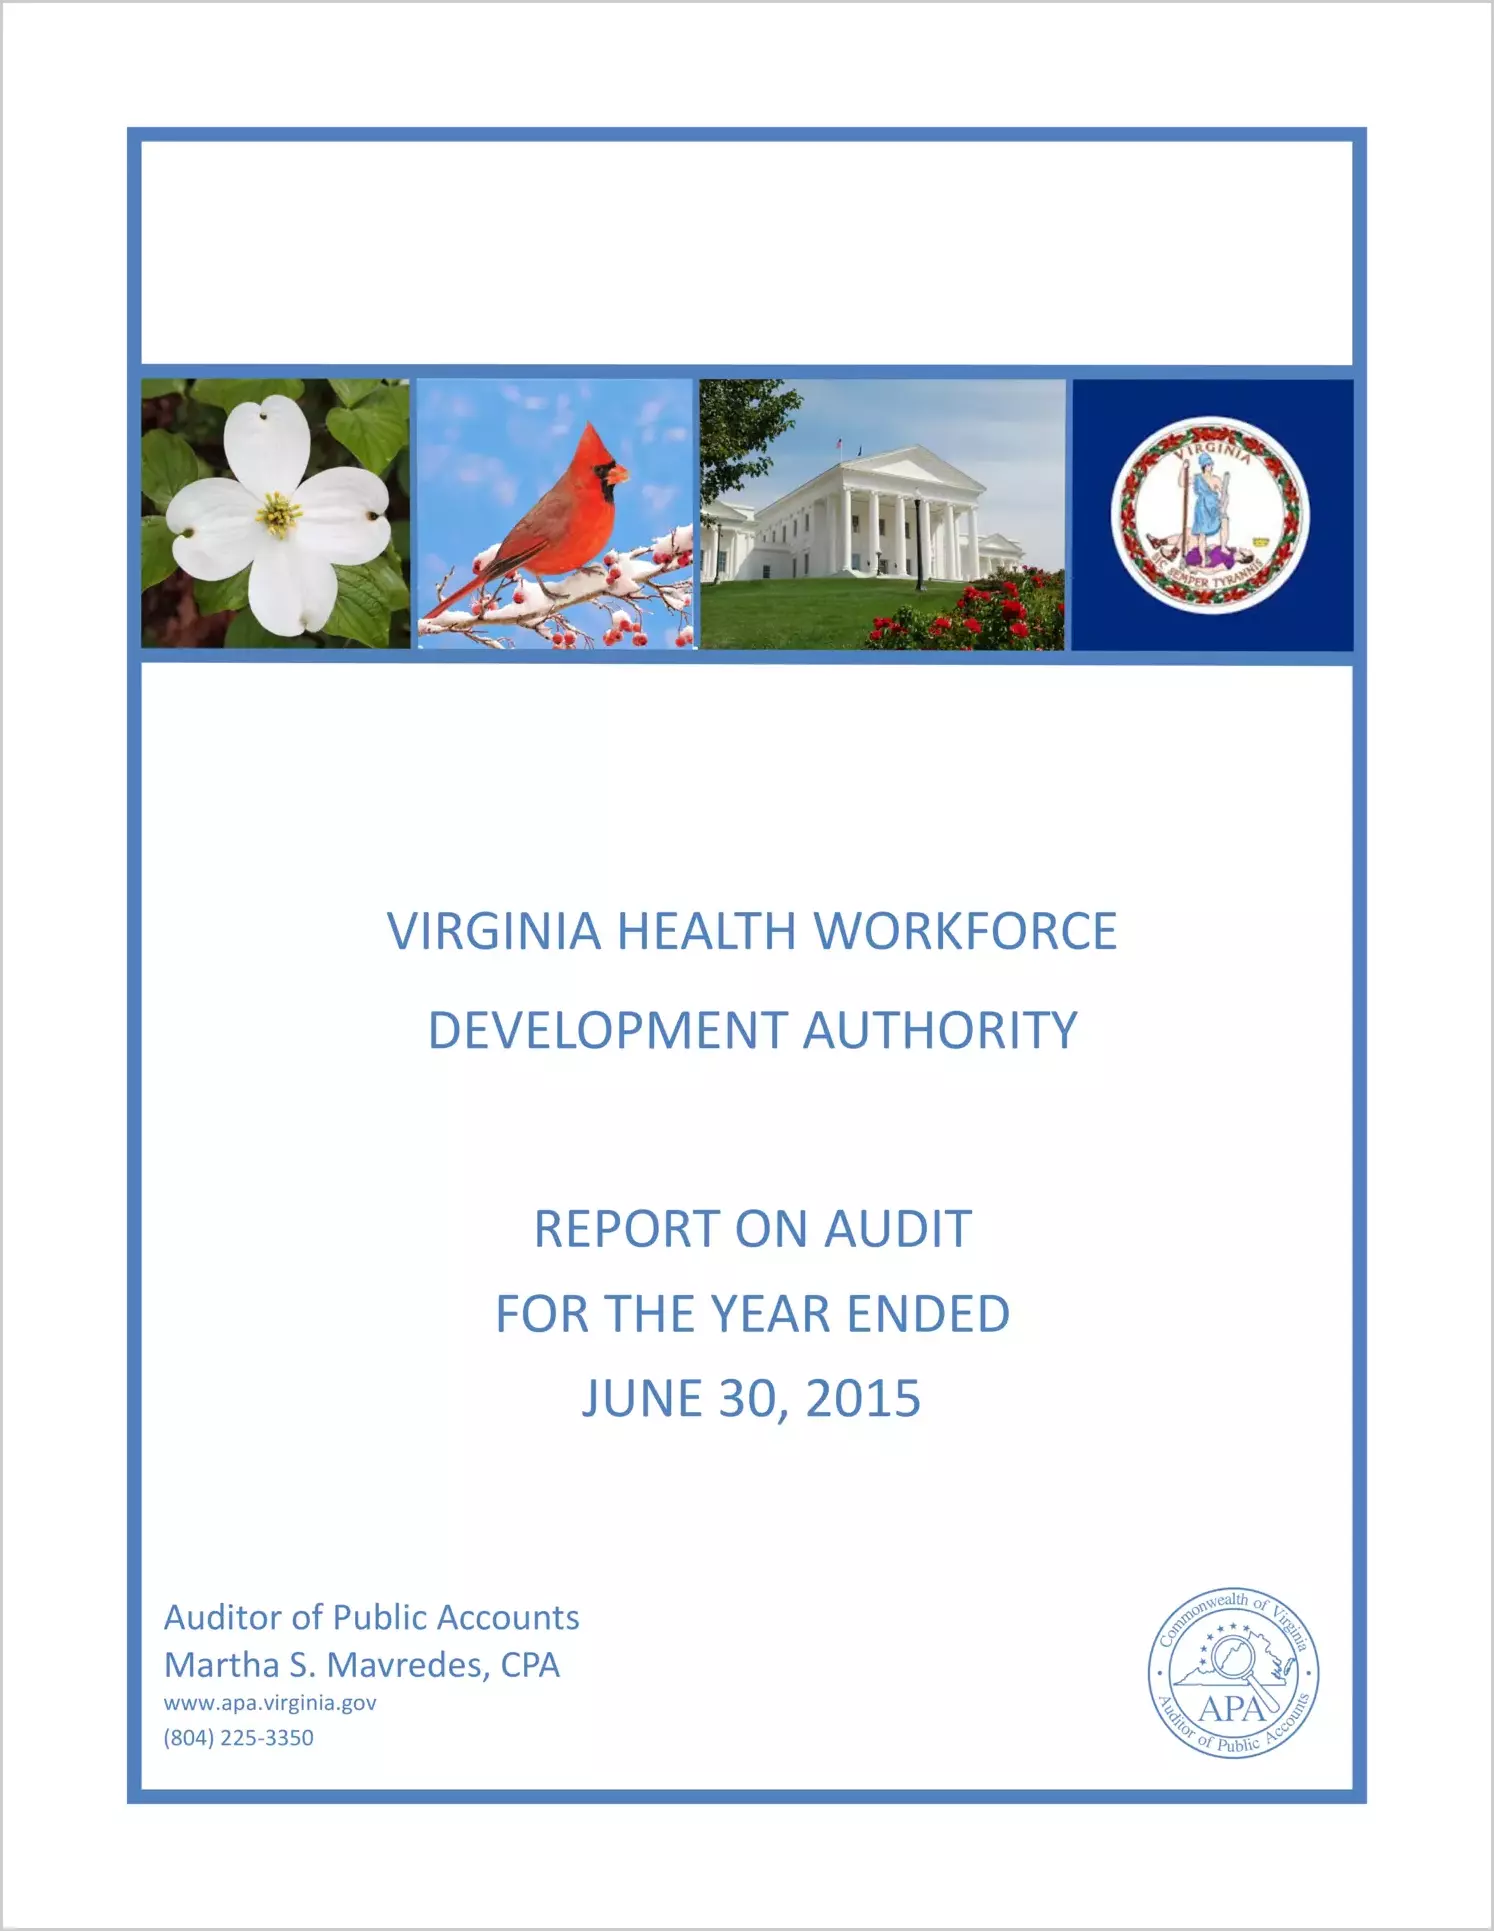 Virginia Health Workforce Development Authority Report on Audit for the Year Ended June 30, 2015